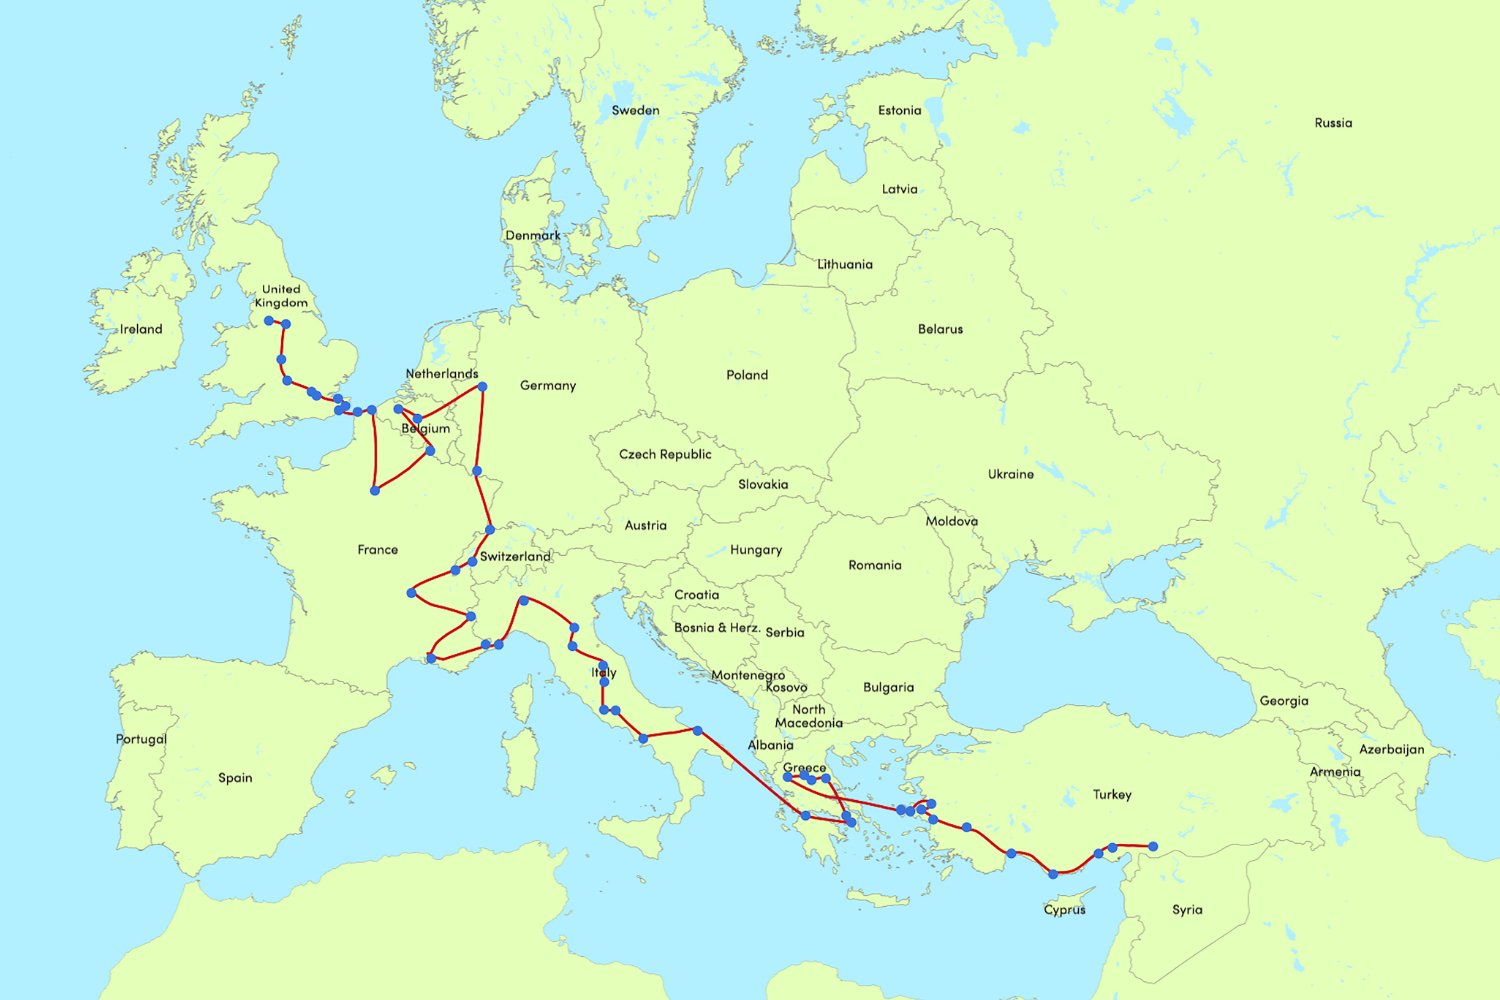   The route  